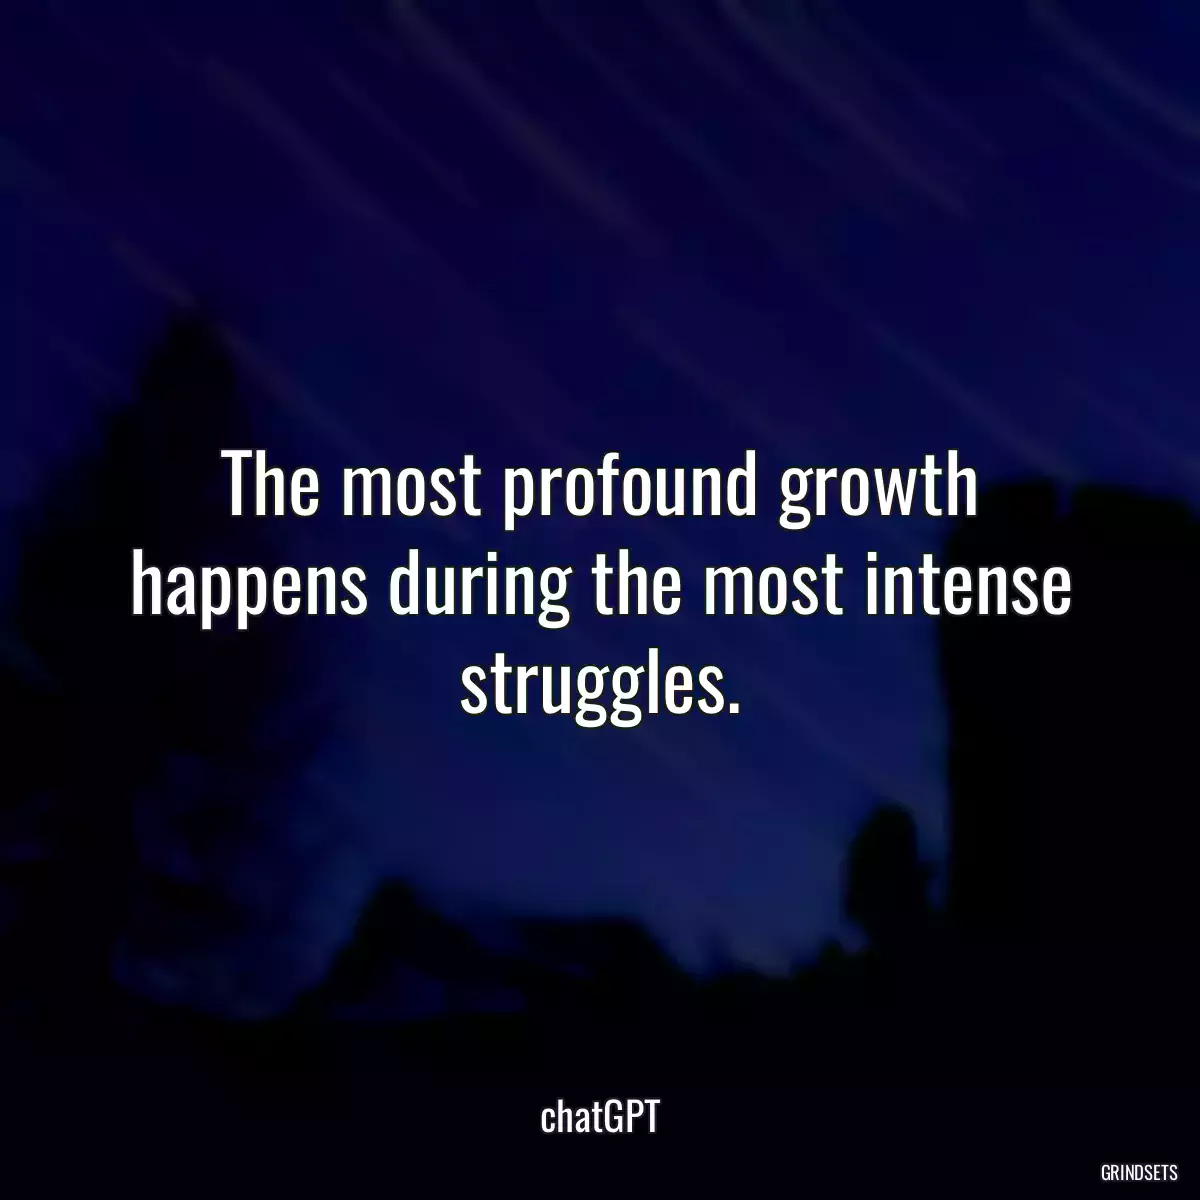 The most profound growth happens during the most intense struggles.